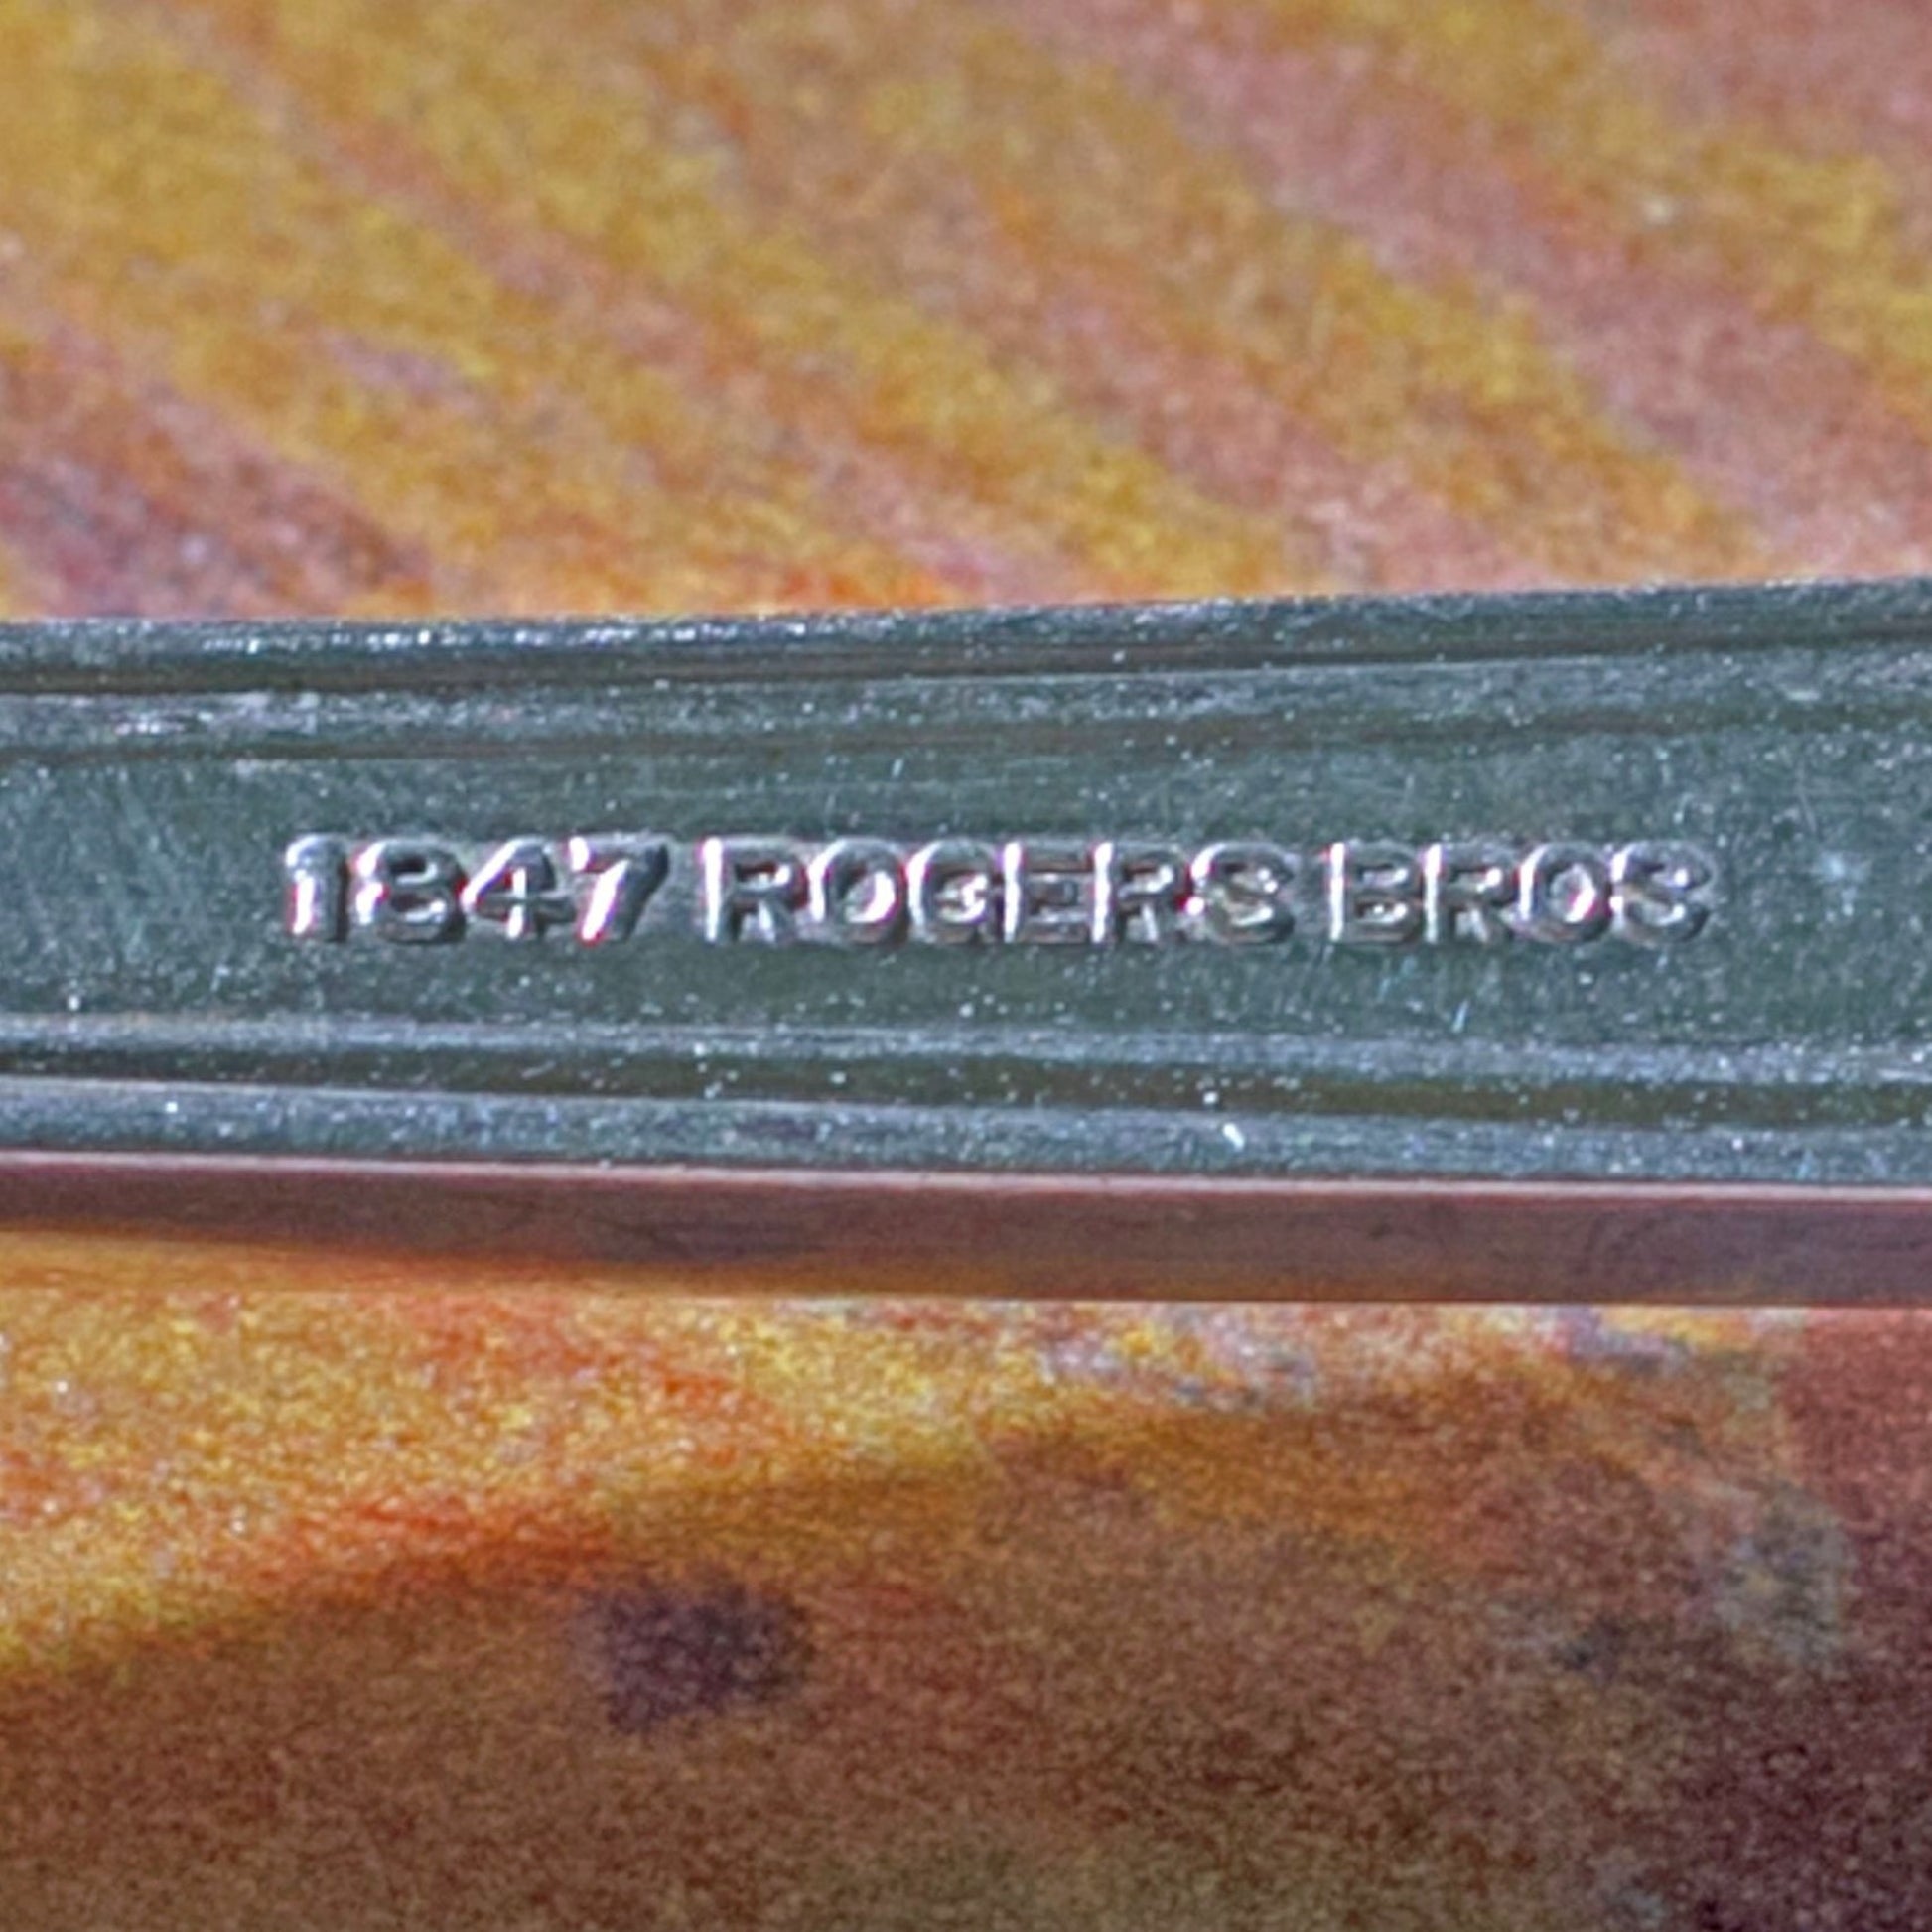 ANNIVERSARY SILVER PLATE MEAT FORK by 1847 Rogers Brothers